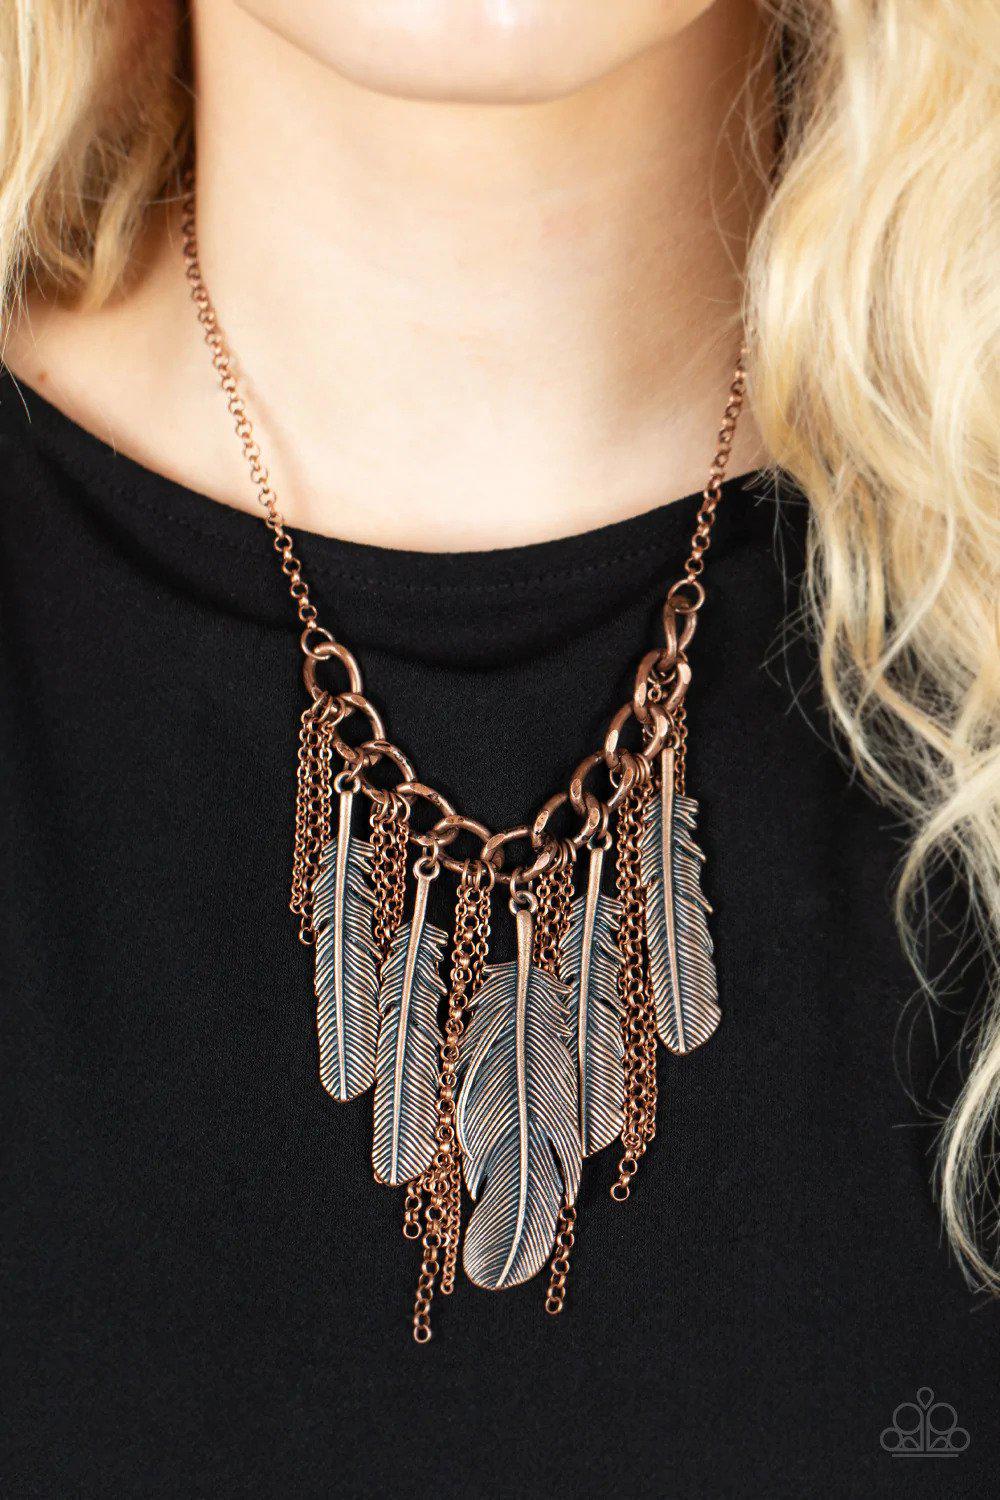 NEST Friends Forever Copper Necklace - Paparazzi Accessories- on model - CarasShop.com - $5 Jewelry by Cara Jewels